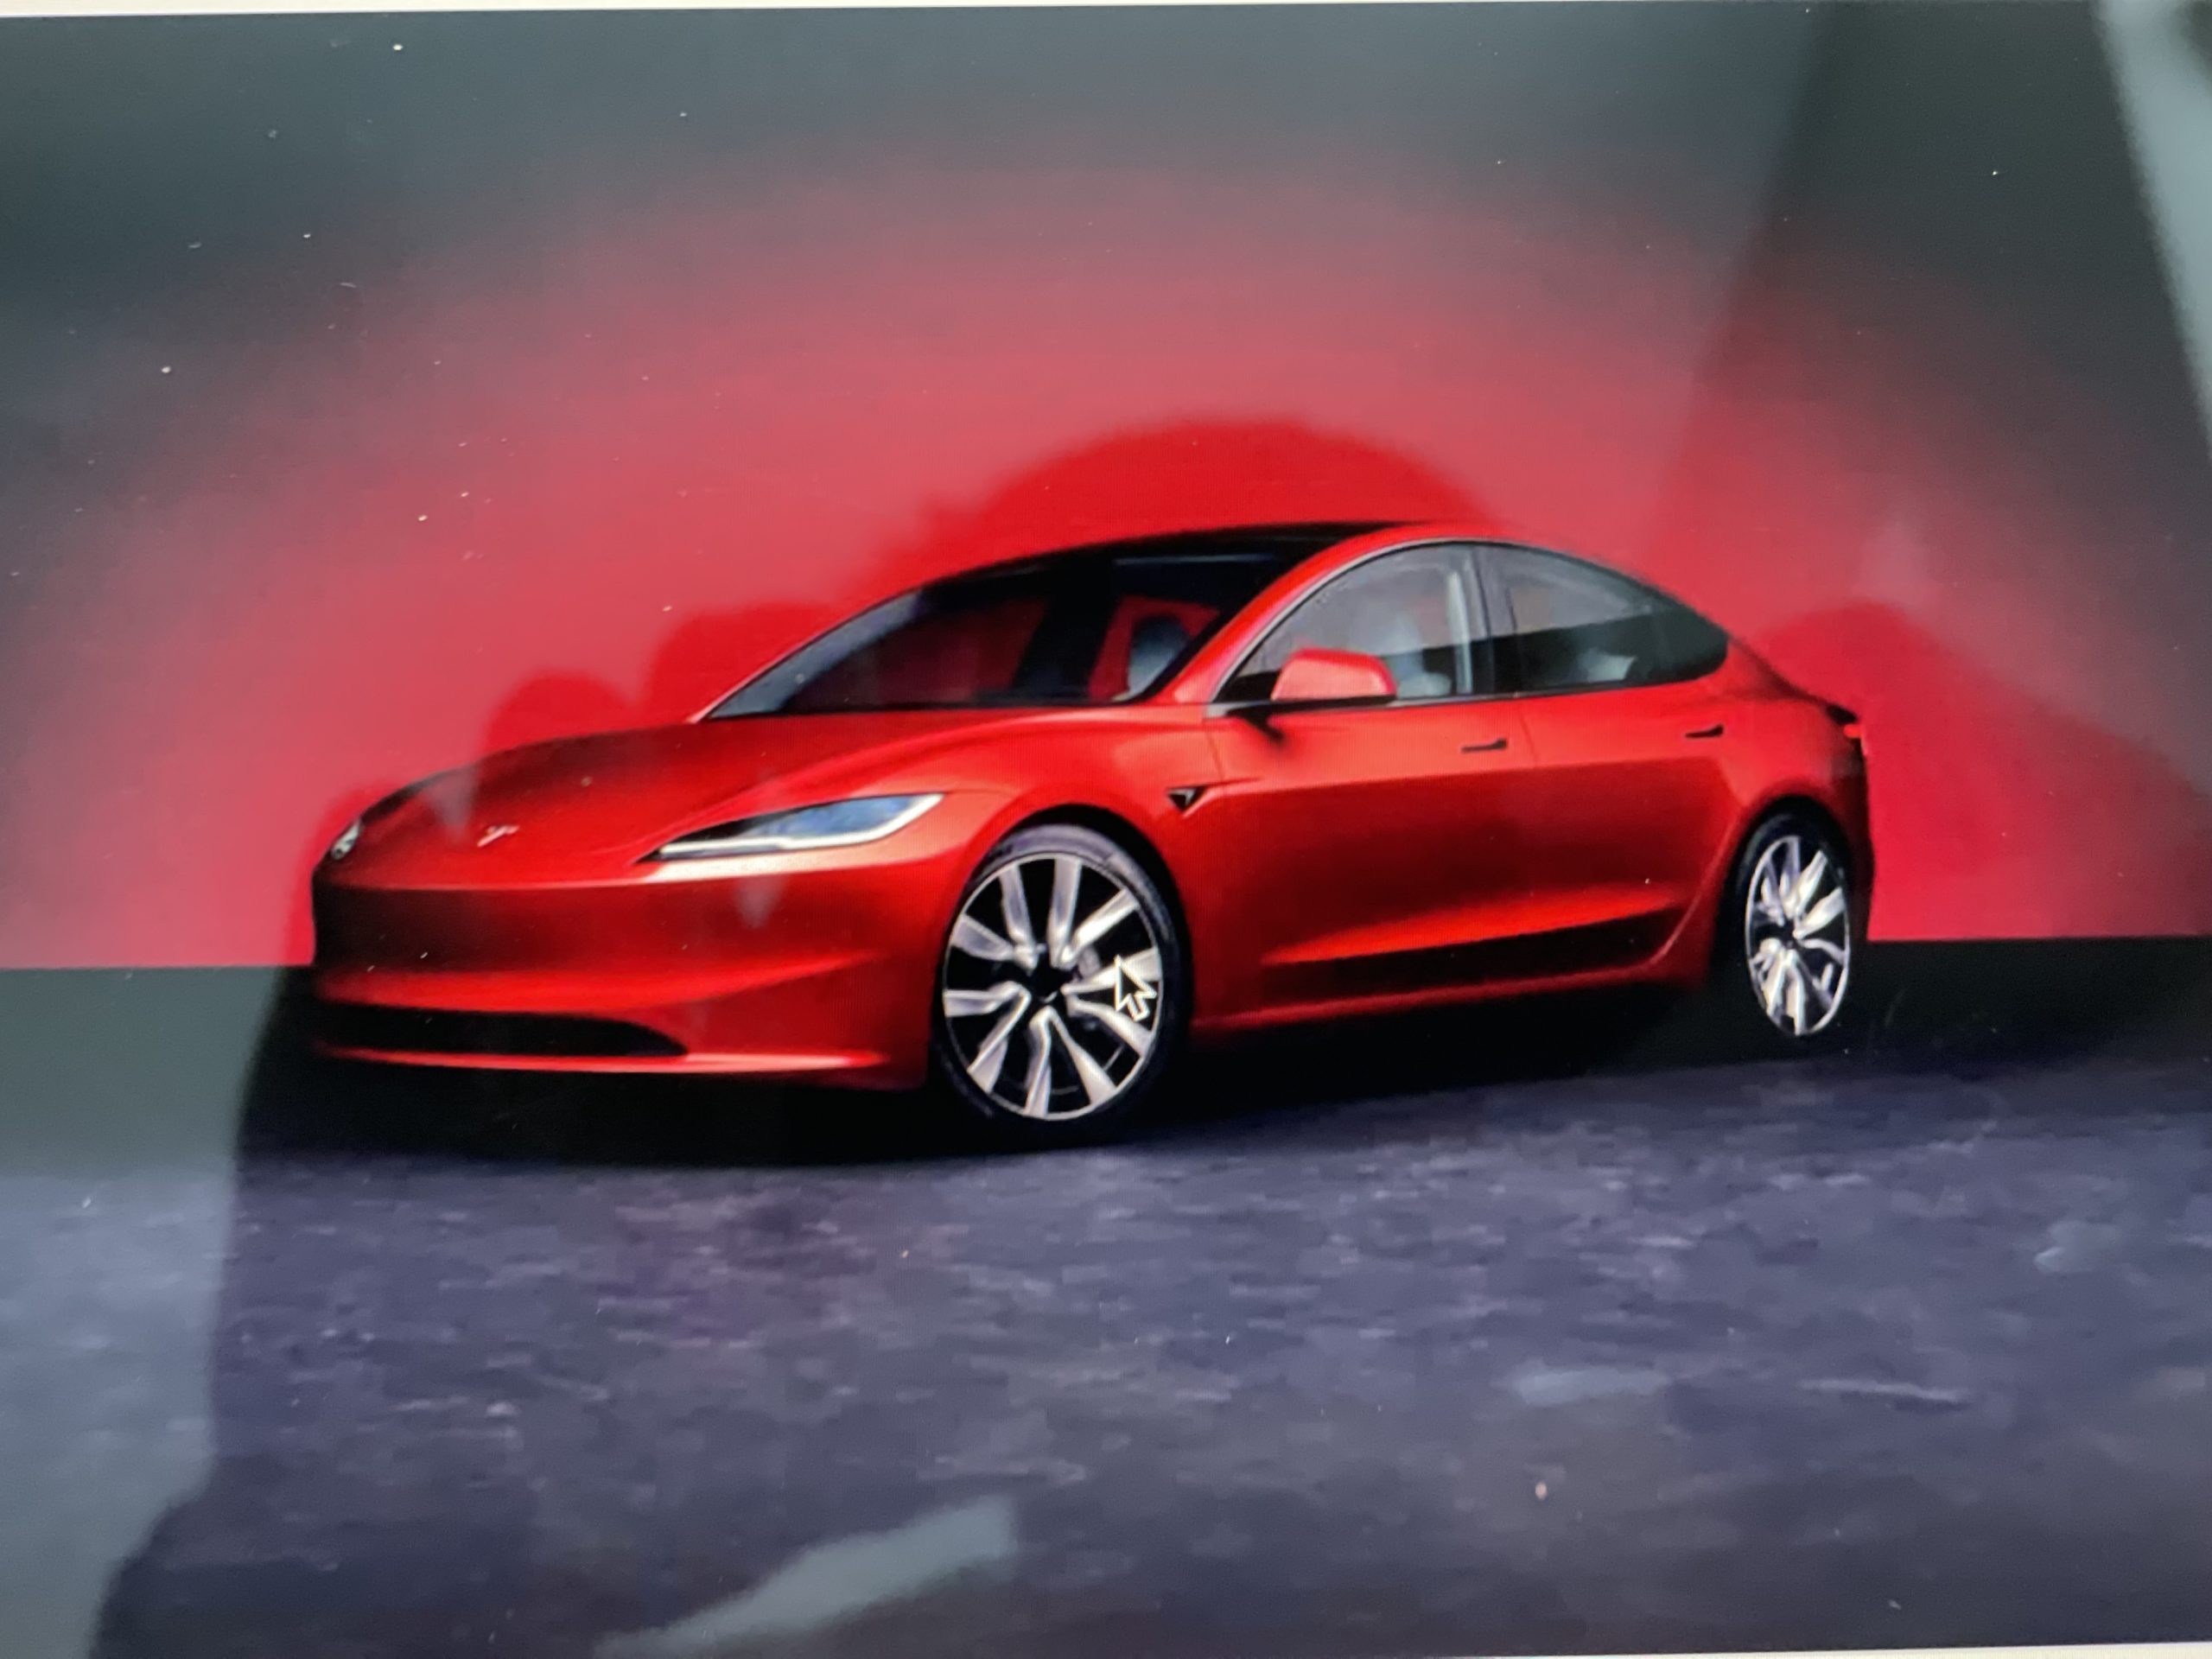 is this the new tesla model 3?